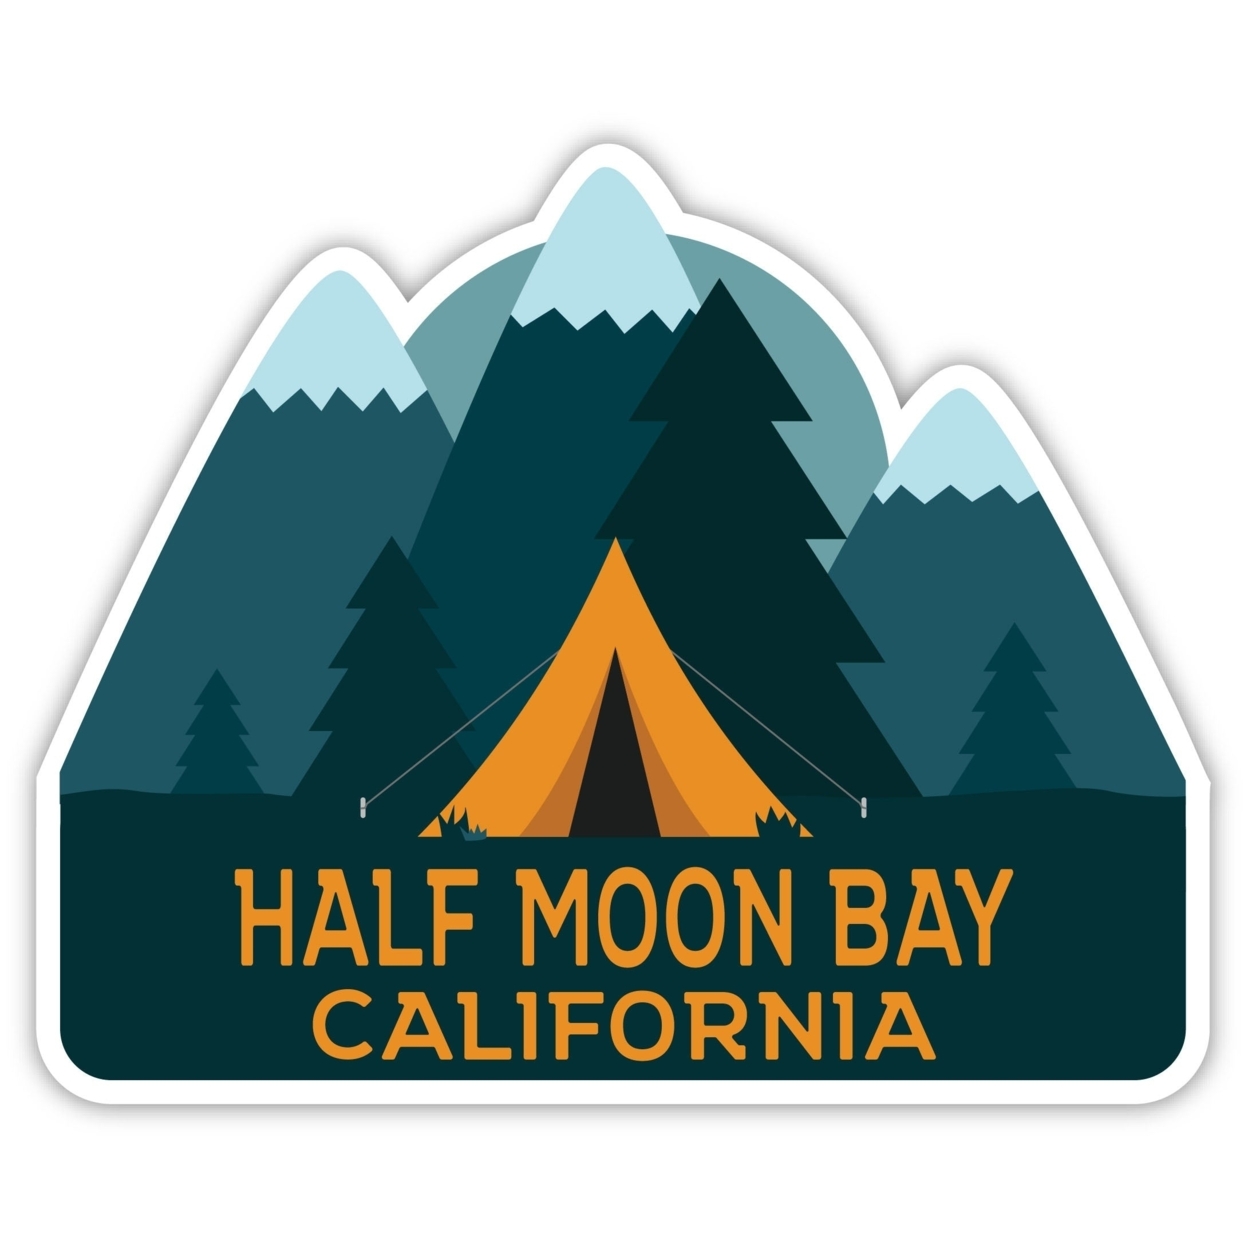 Half Moon Bay California Souvenir Decorative Stickers (Choose Theme And Size) - 4-Pack, 4-Inch, Tent